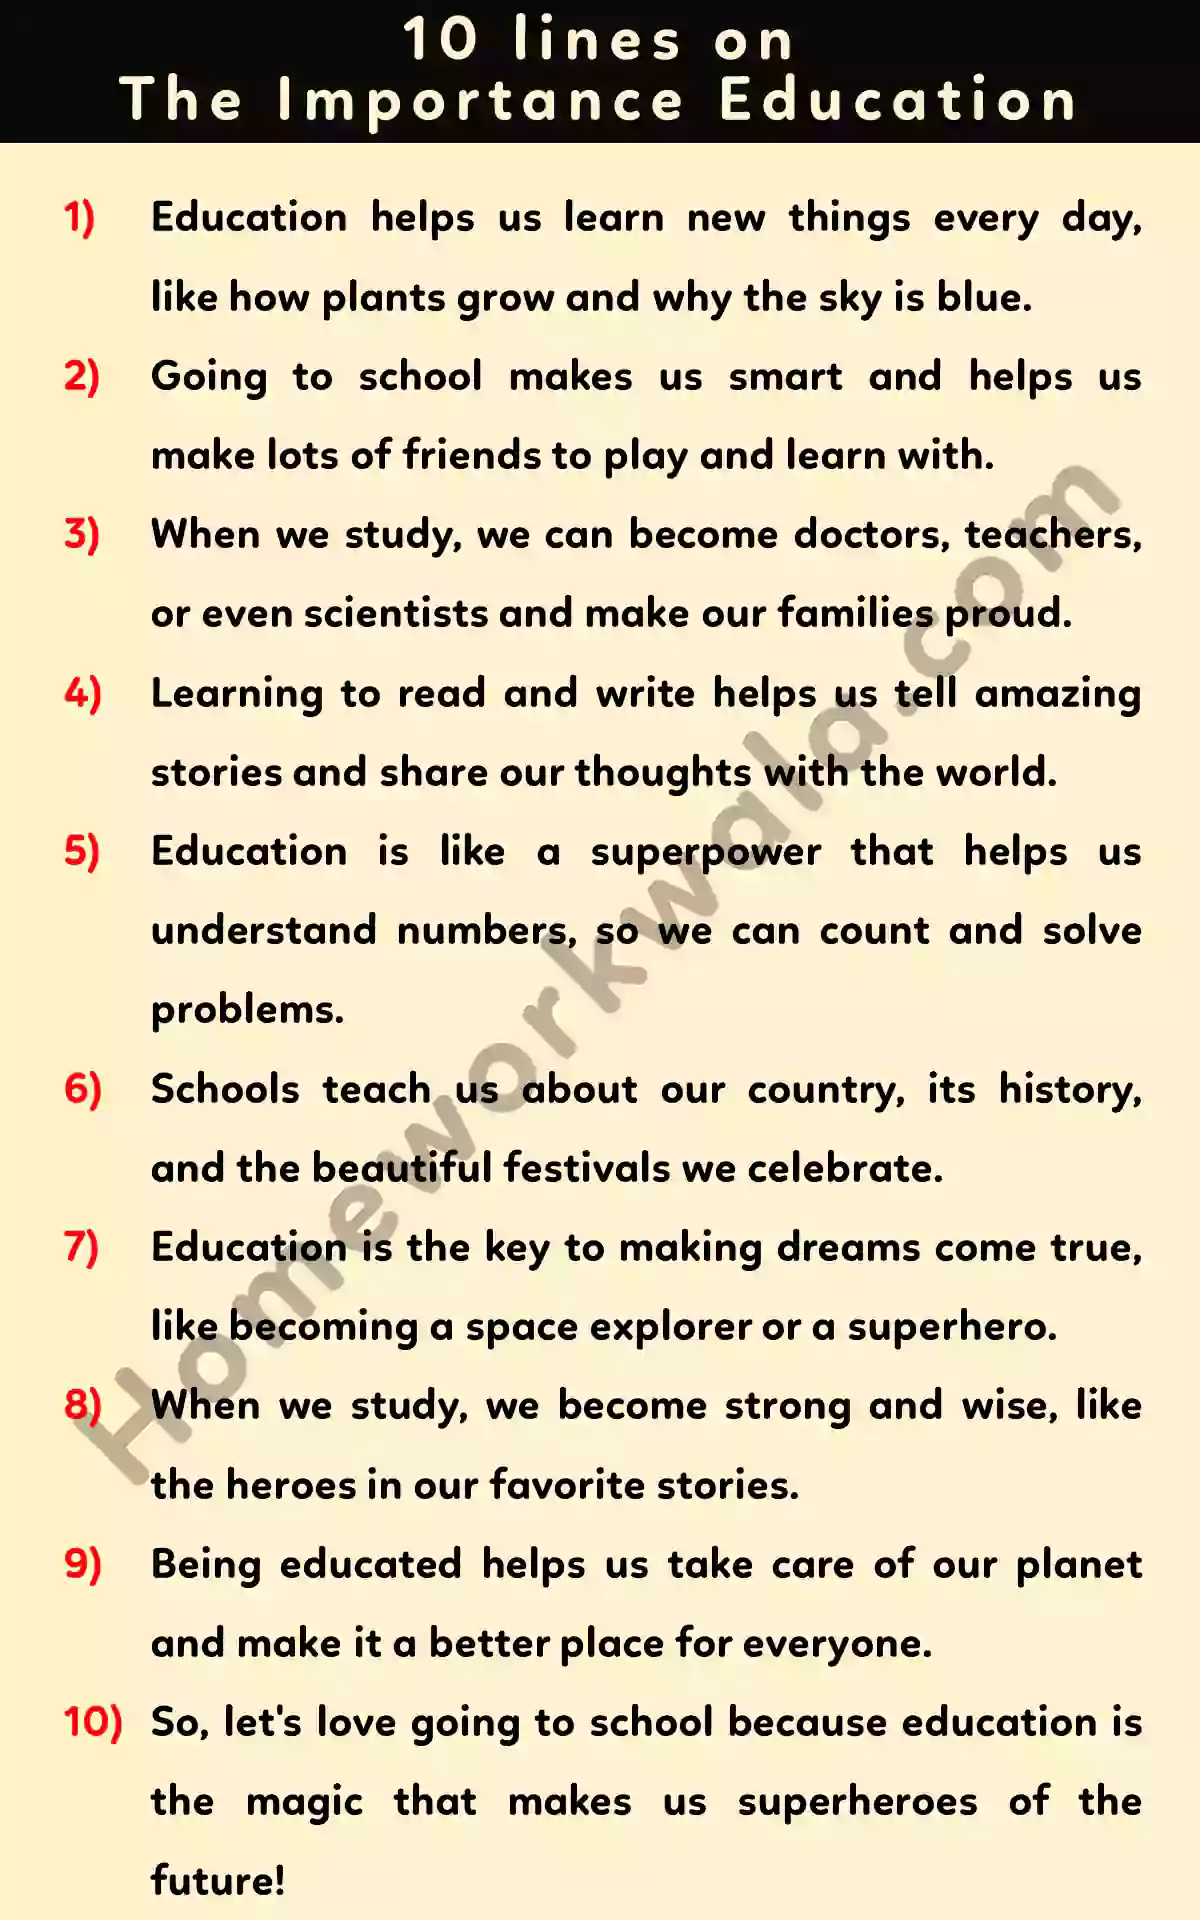 10 lines about the importance of Education